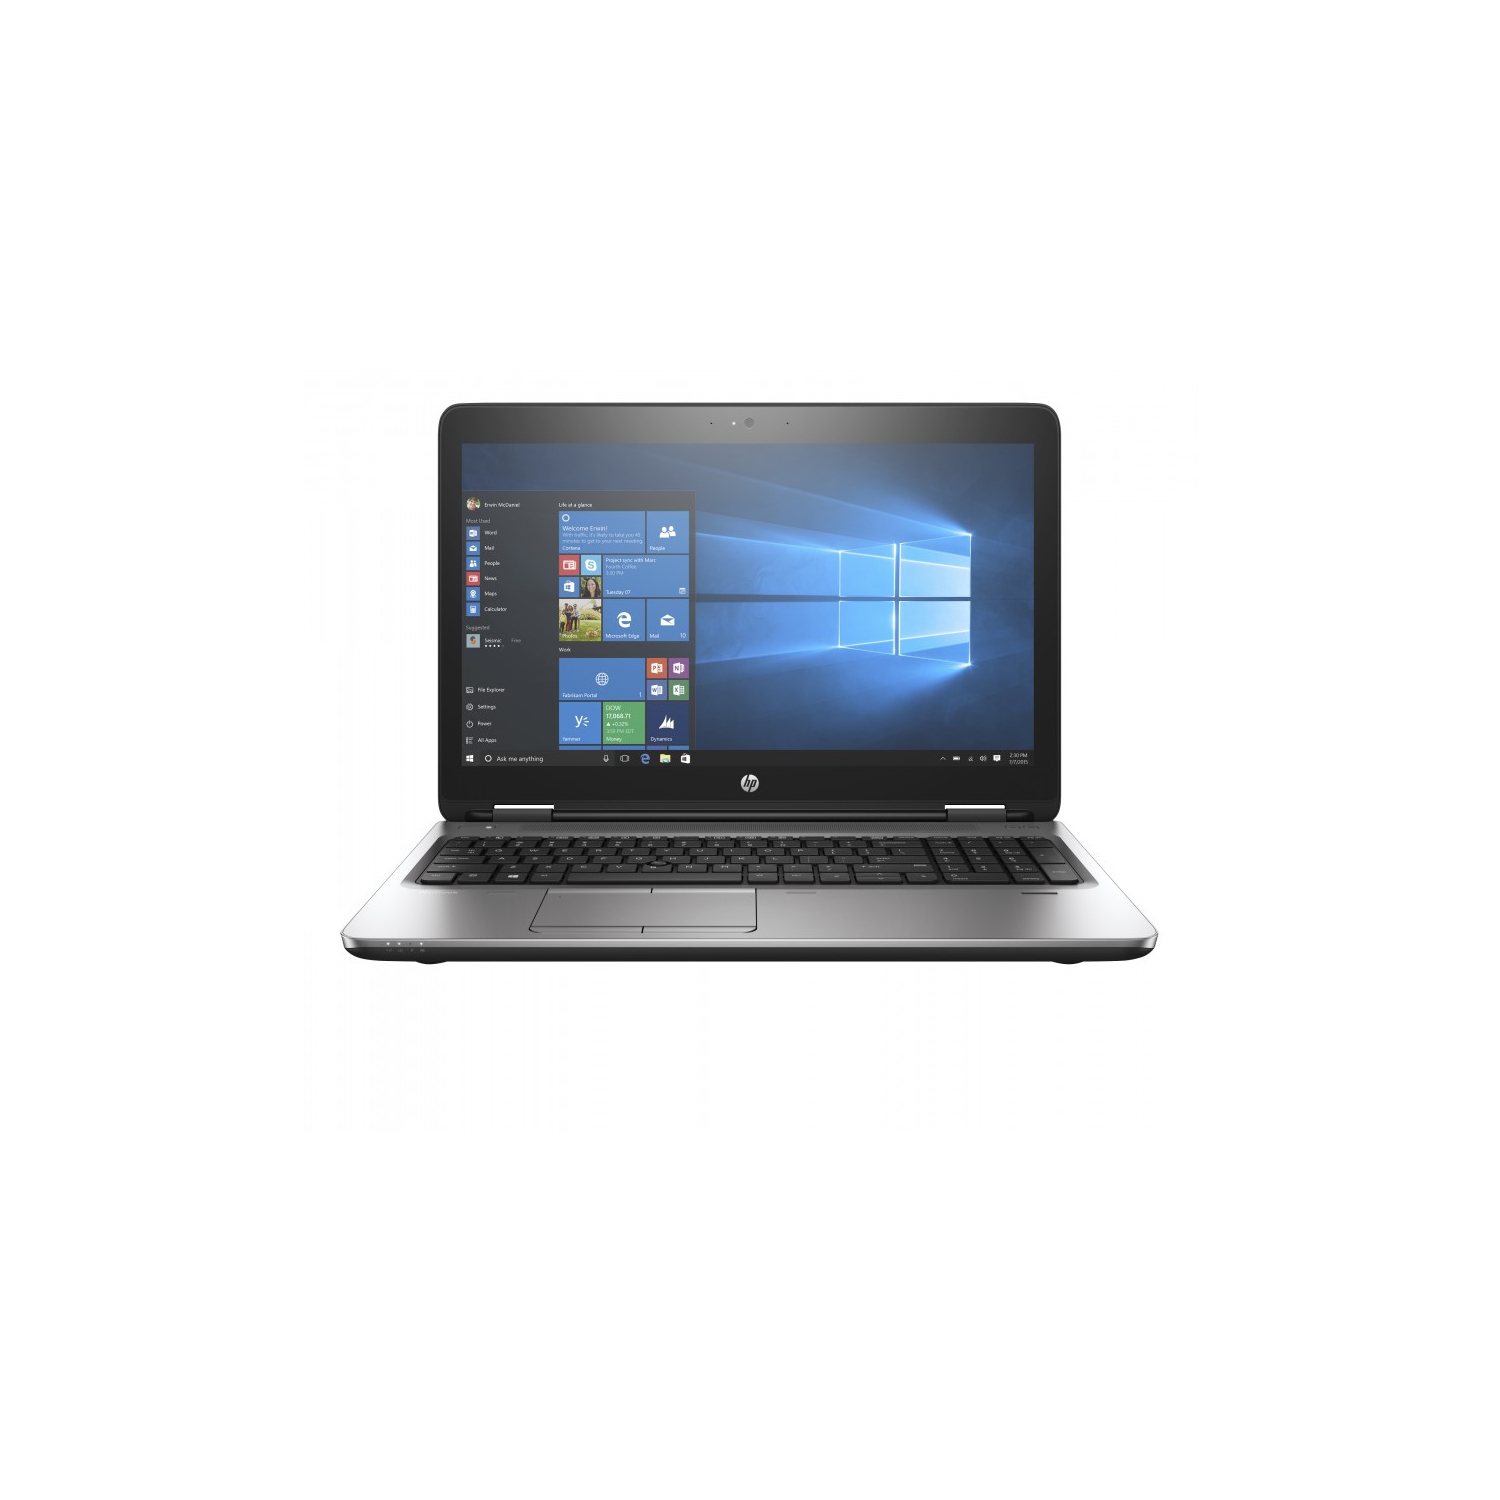 Refurbished (Good) - HP ProBook 650 G2 Business Laptop Computer Core i5 6th Gen 6200 ,16GB RAM, 256GB SSD ,15.6-inch LCD ,Webcam ,New Wireless Mouse ,Wins 10 Pro